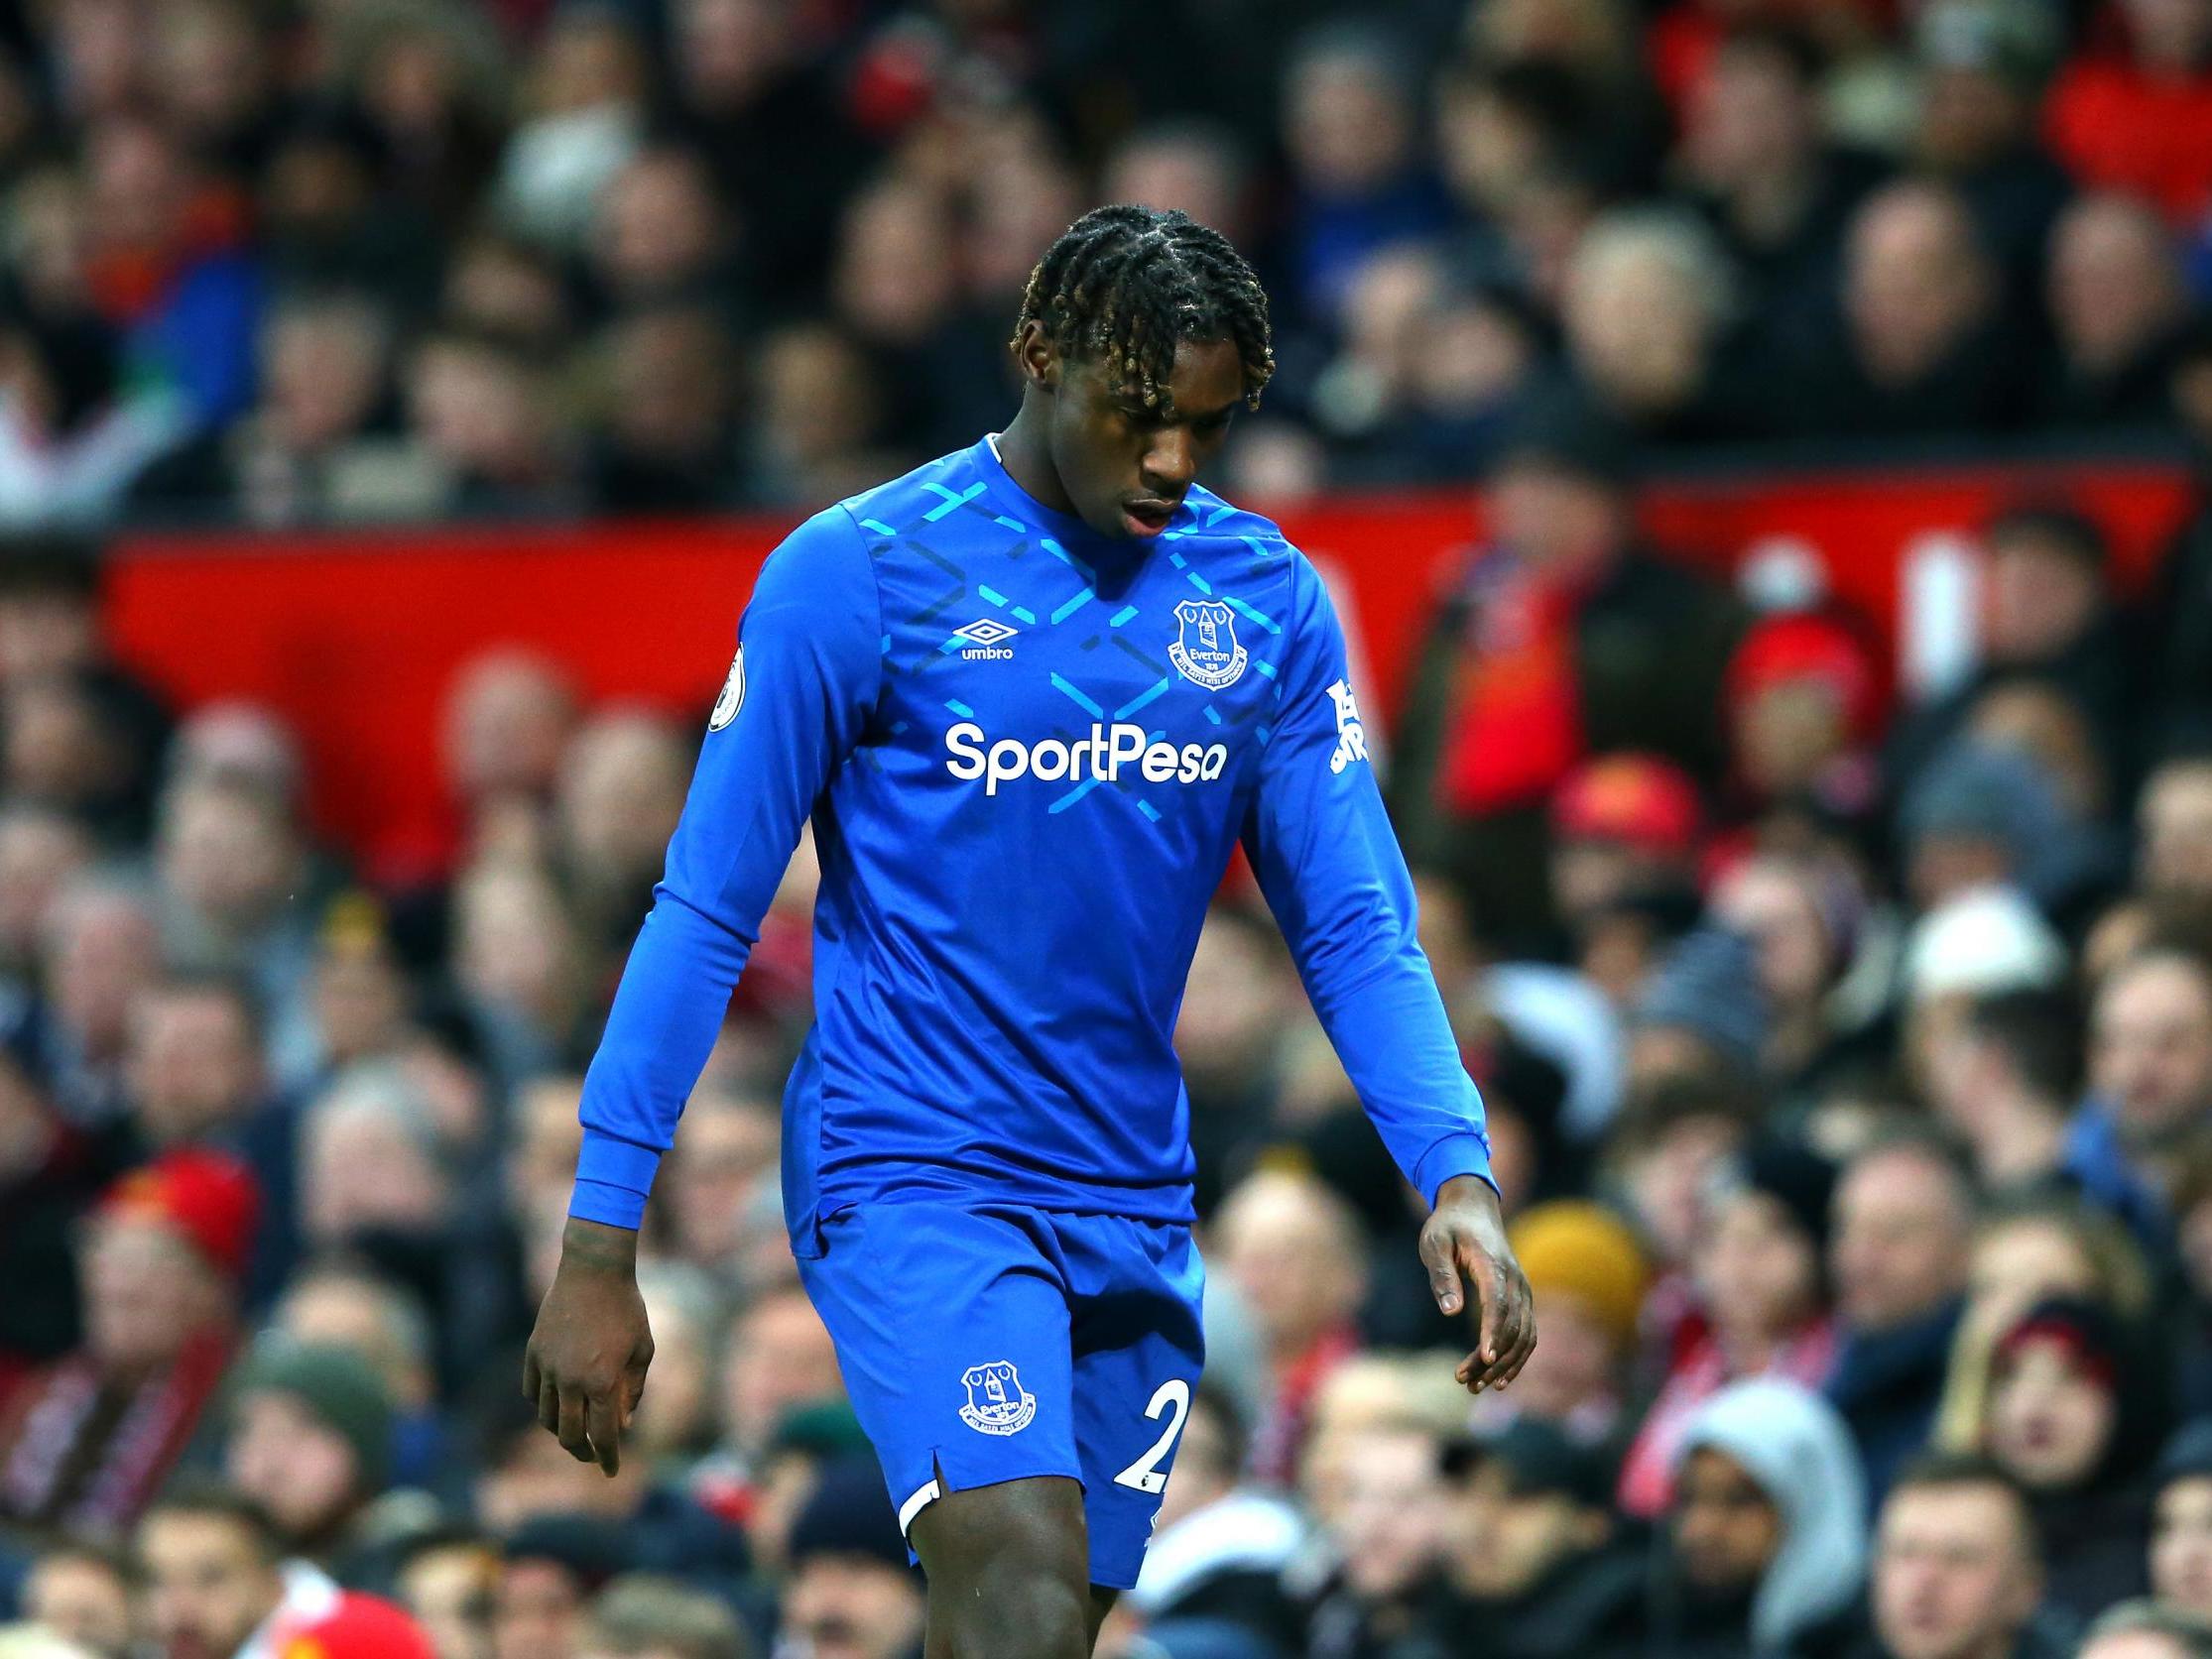 Everton striker Moise Kean walks off the pitch at Old Trafford